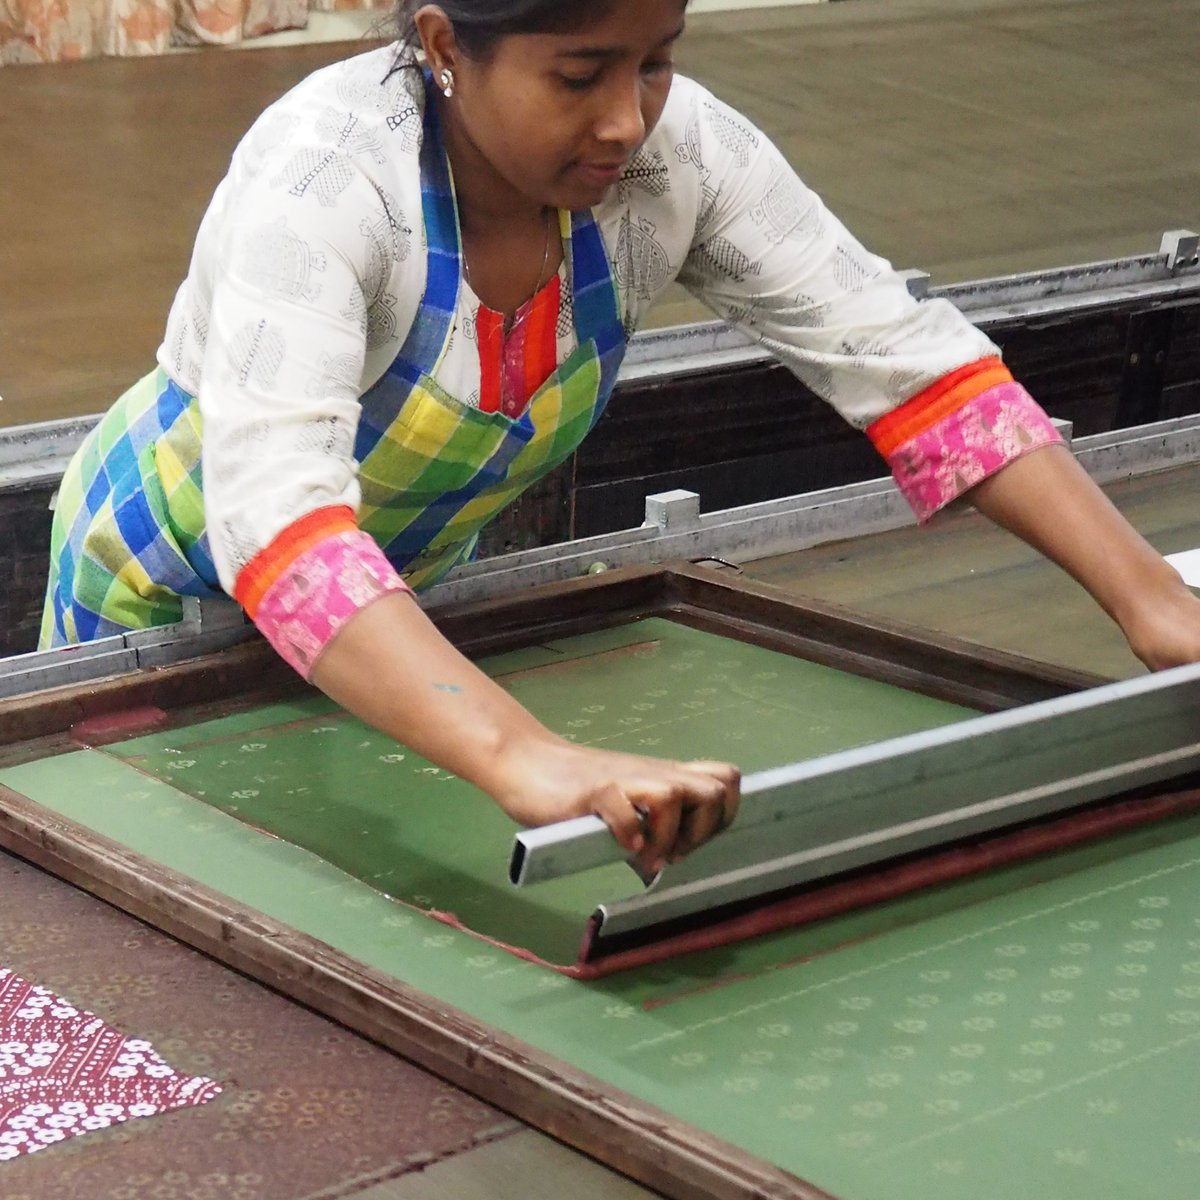 Our impact partners provide women with a safe place to work, training in an employable skill and provides the opportunity for independent earnings. Proudly screen printed in India. Lovingly made in London. #ethicalfashion